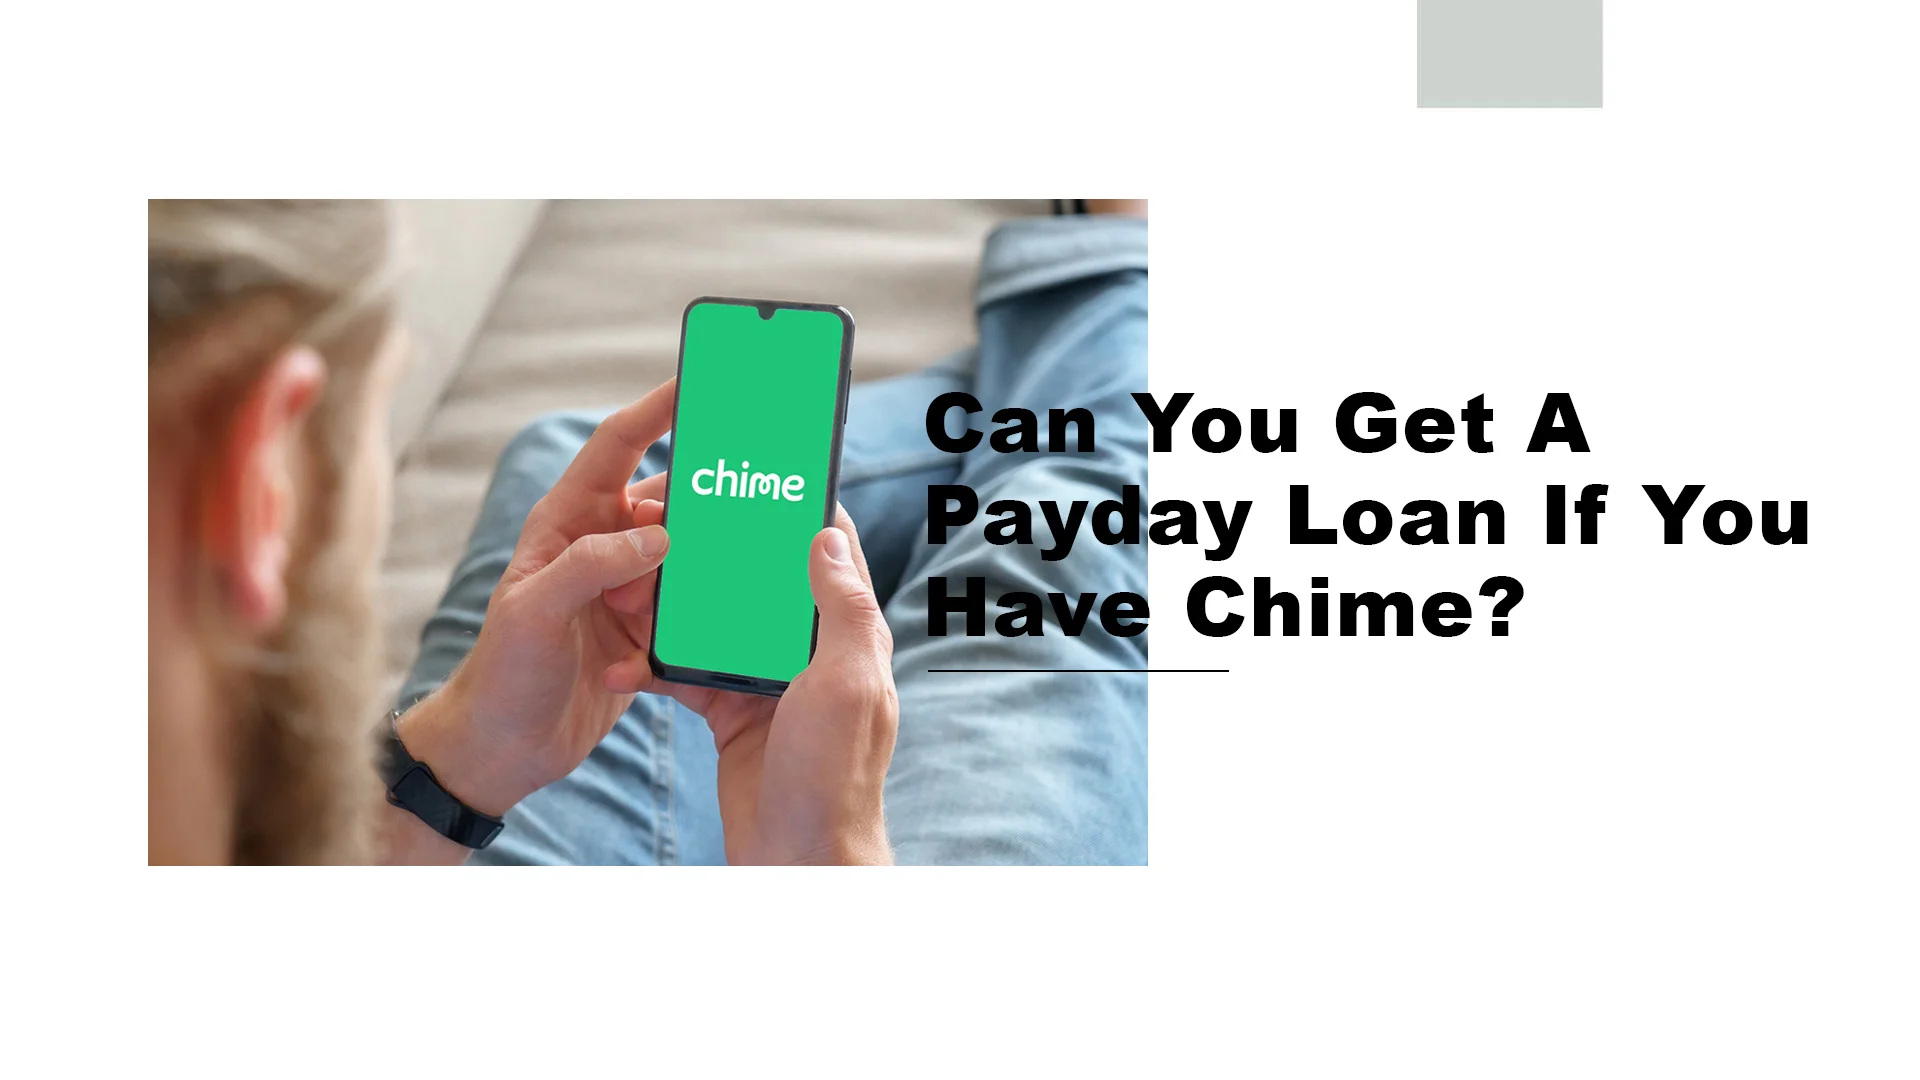 Can-You-Get-A-Payday-Loan-If-You-Have-Chime